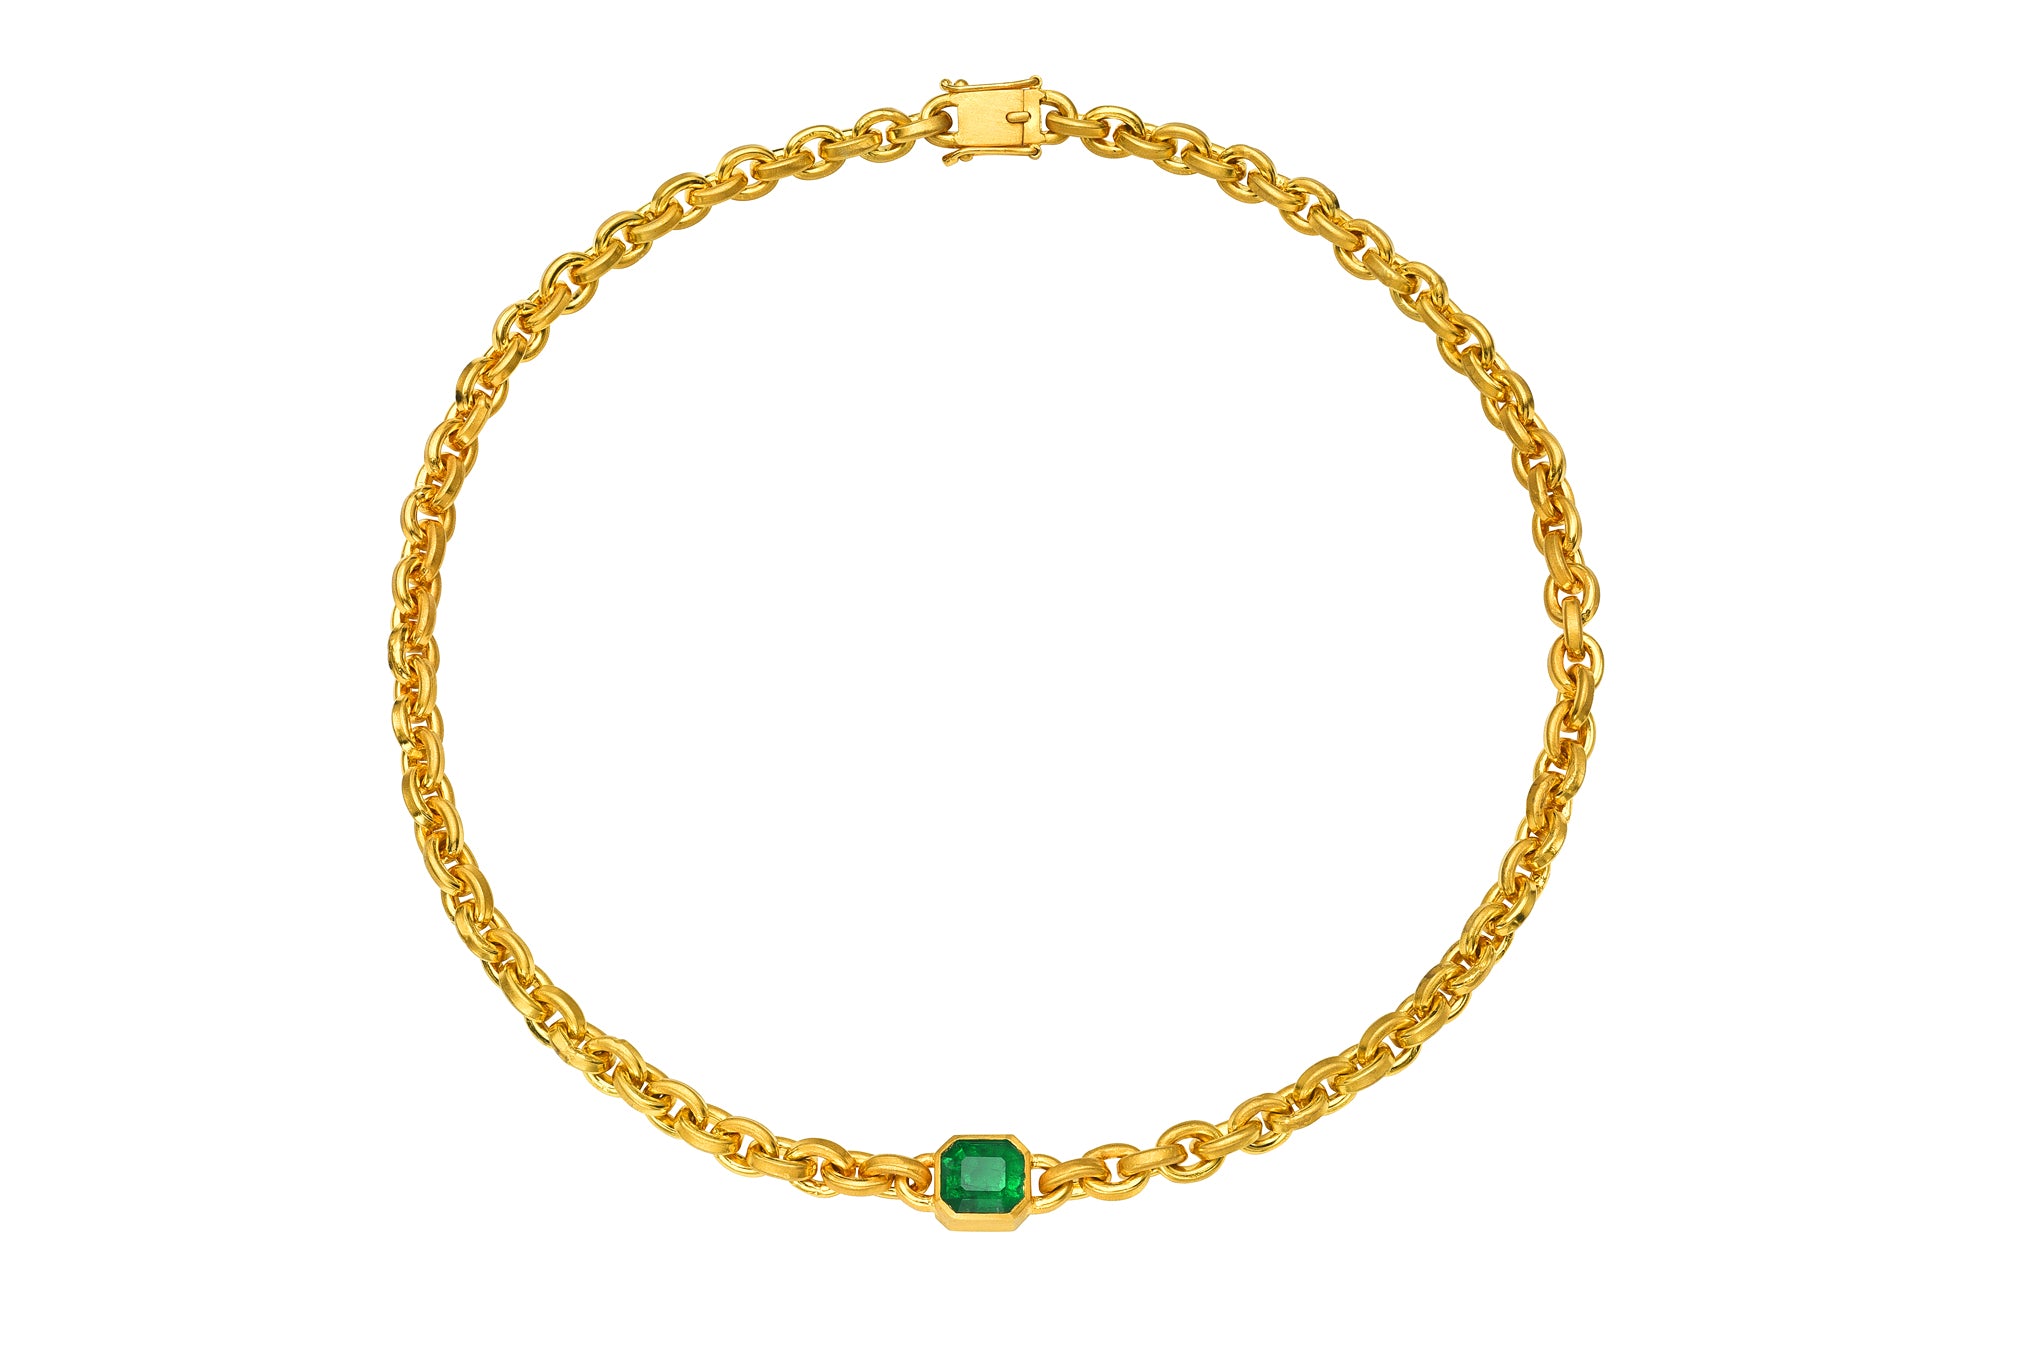 Darius Jewels one of a kind oversized emerald Colombian signature chain